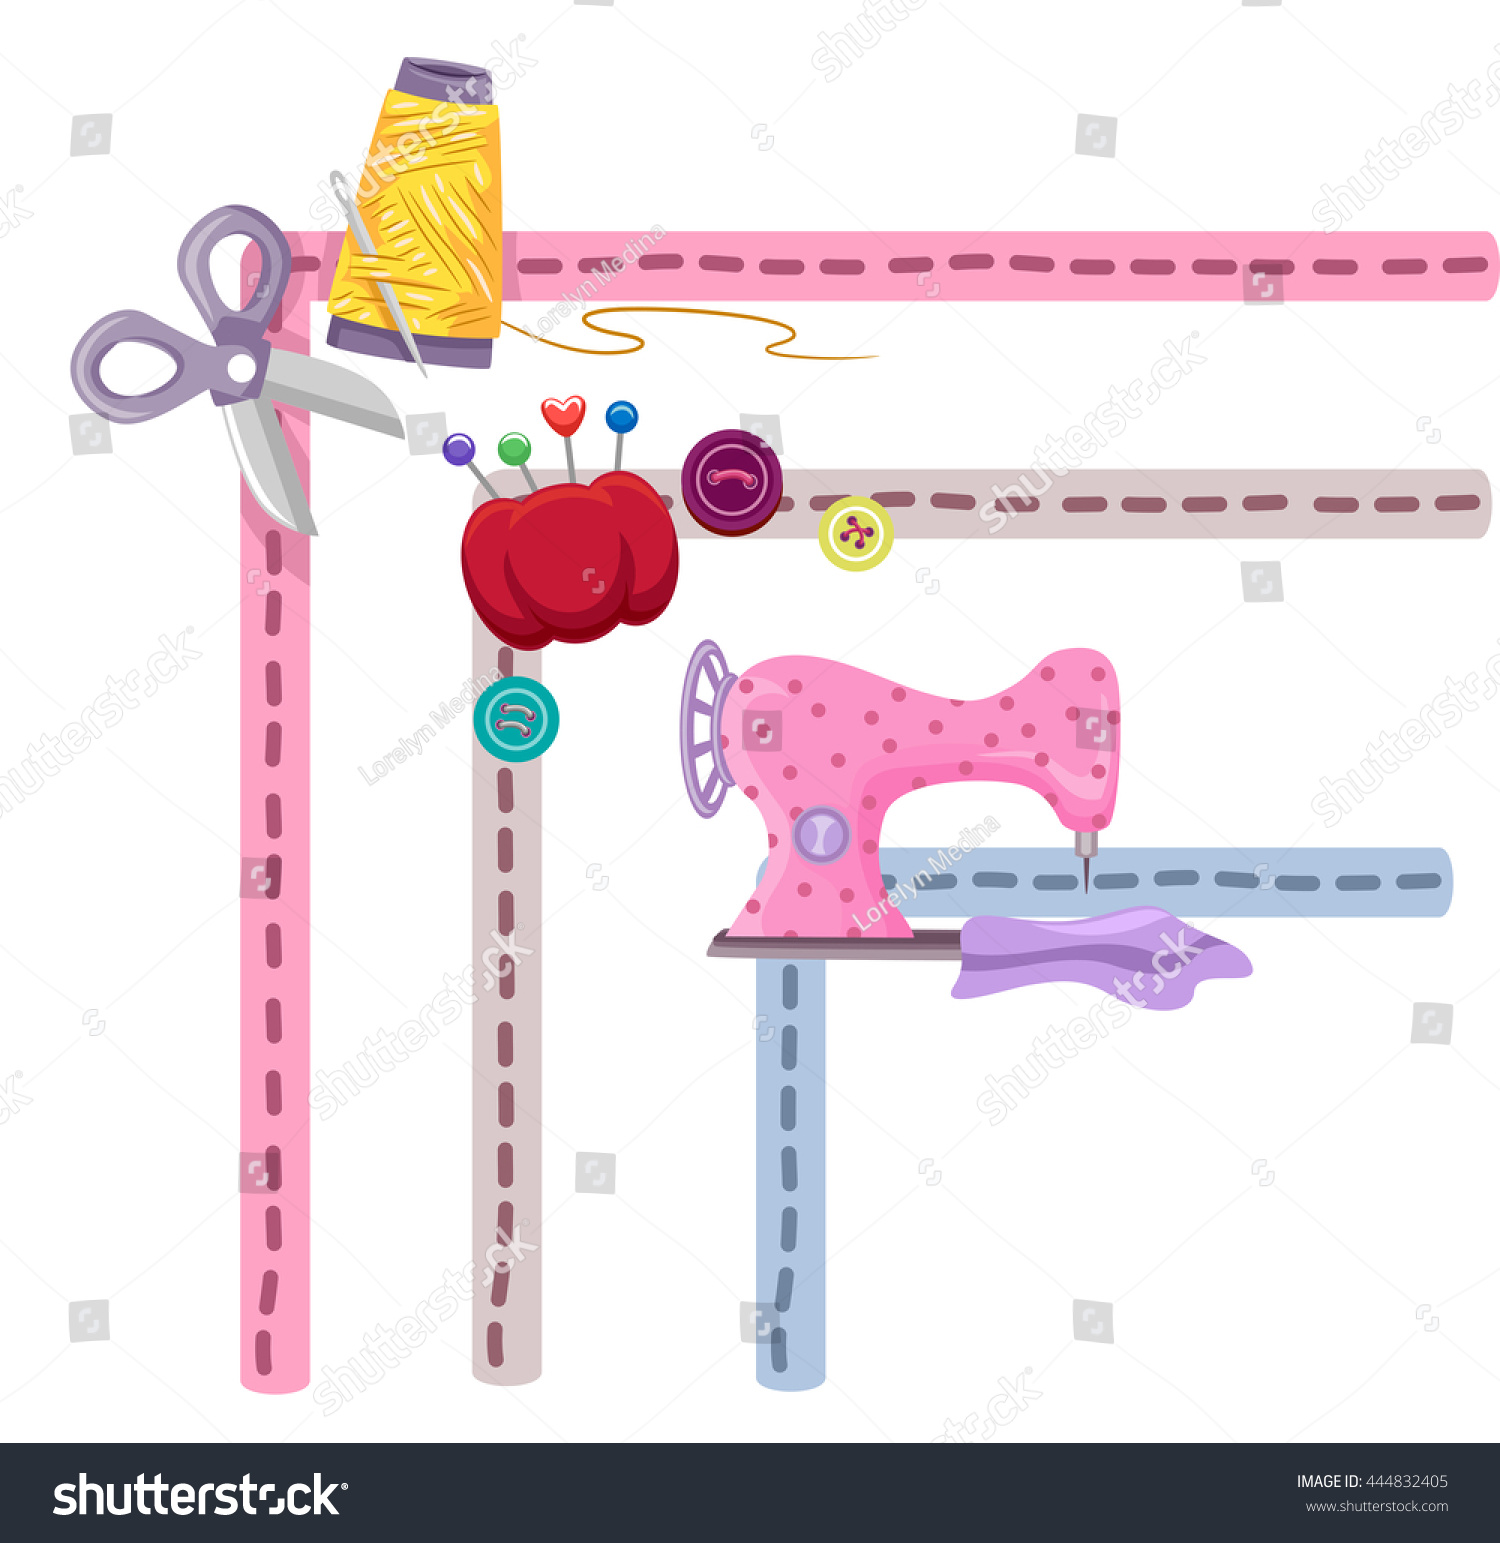 Border Illustration Featuring Sewing Elements Stock Vector (Royalty ...